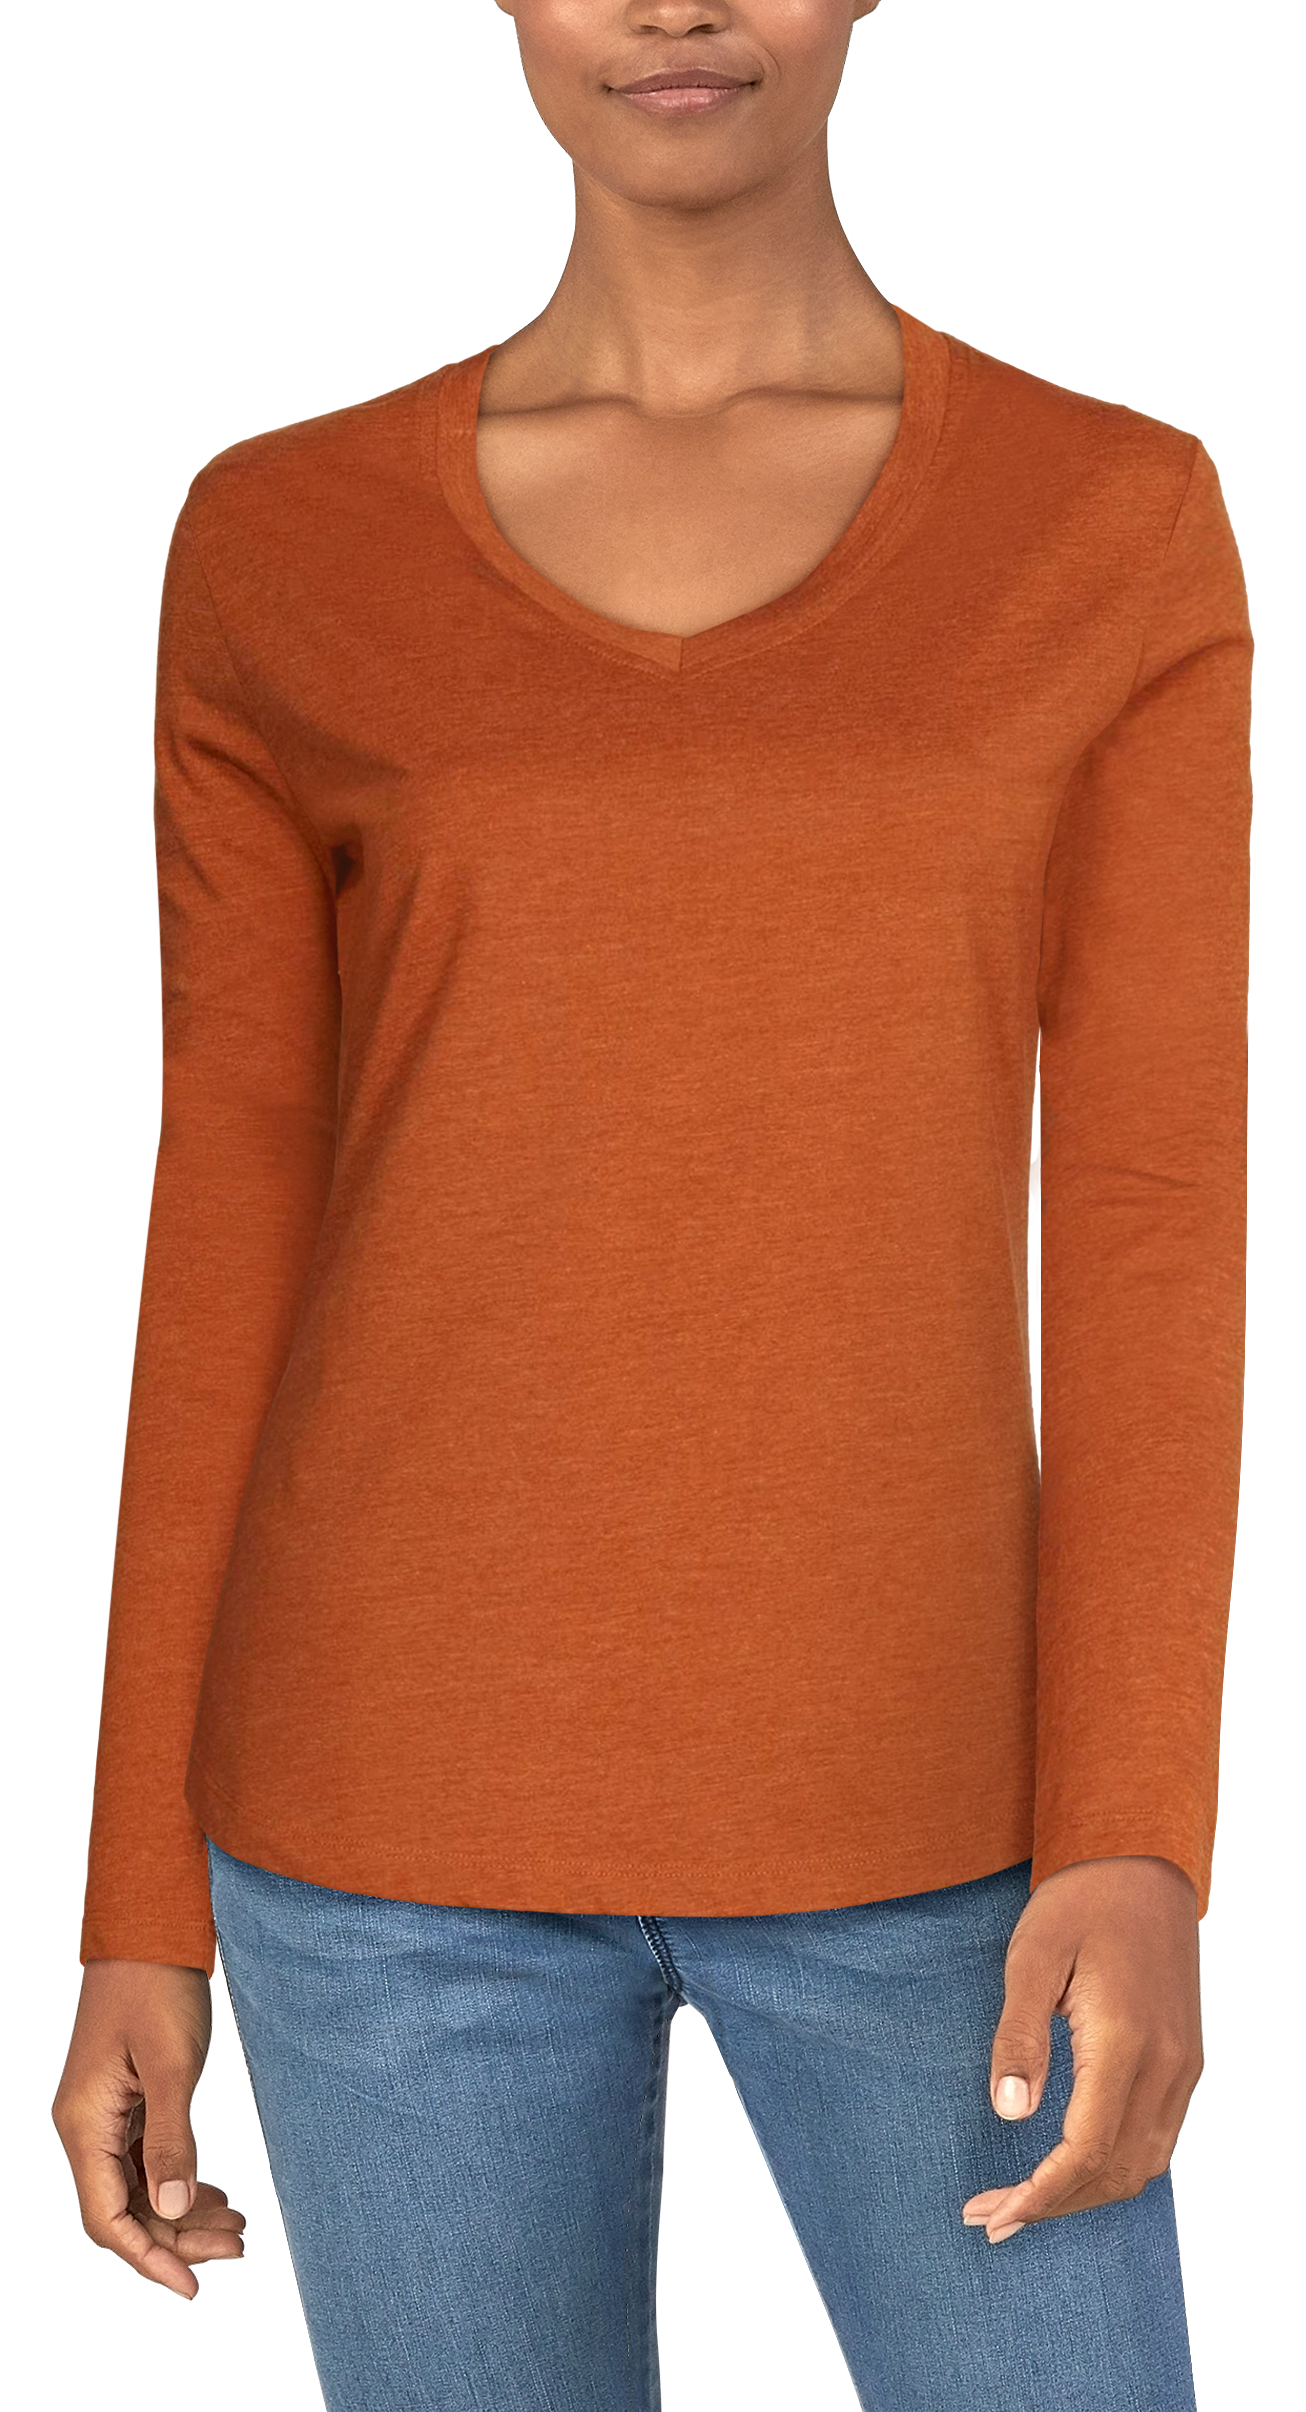 Natural Reflections Essential Long-Sleeve V-Neck T-Shirt for Ladies - Caramel Cafe - 1X